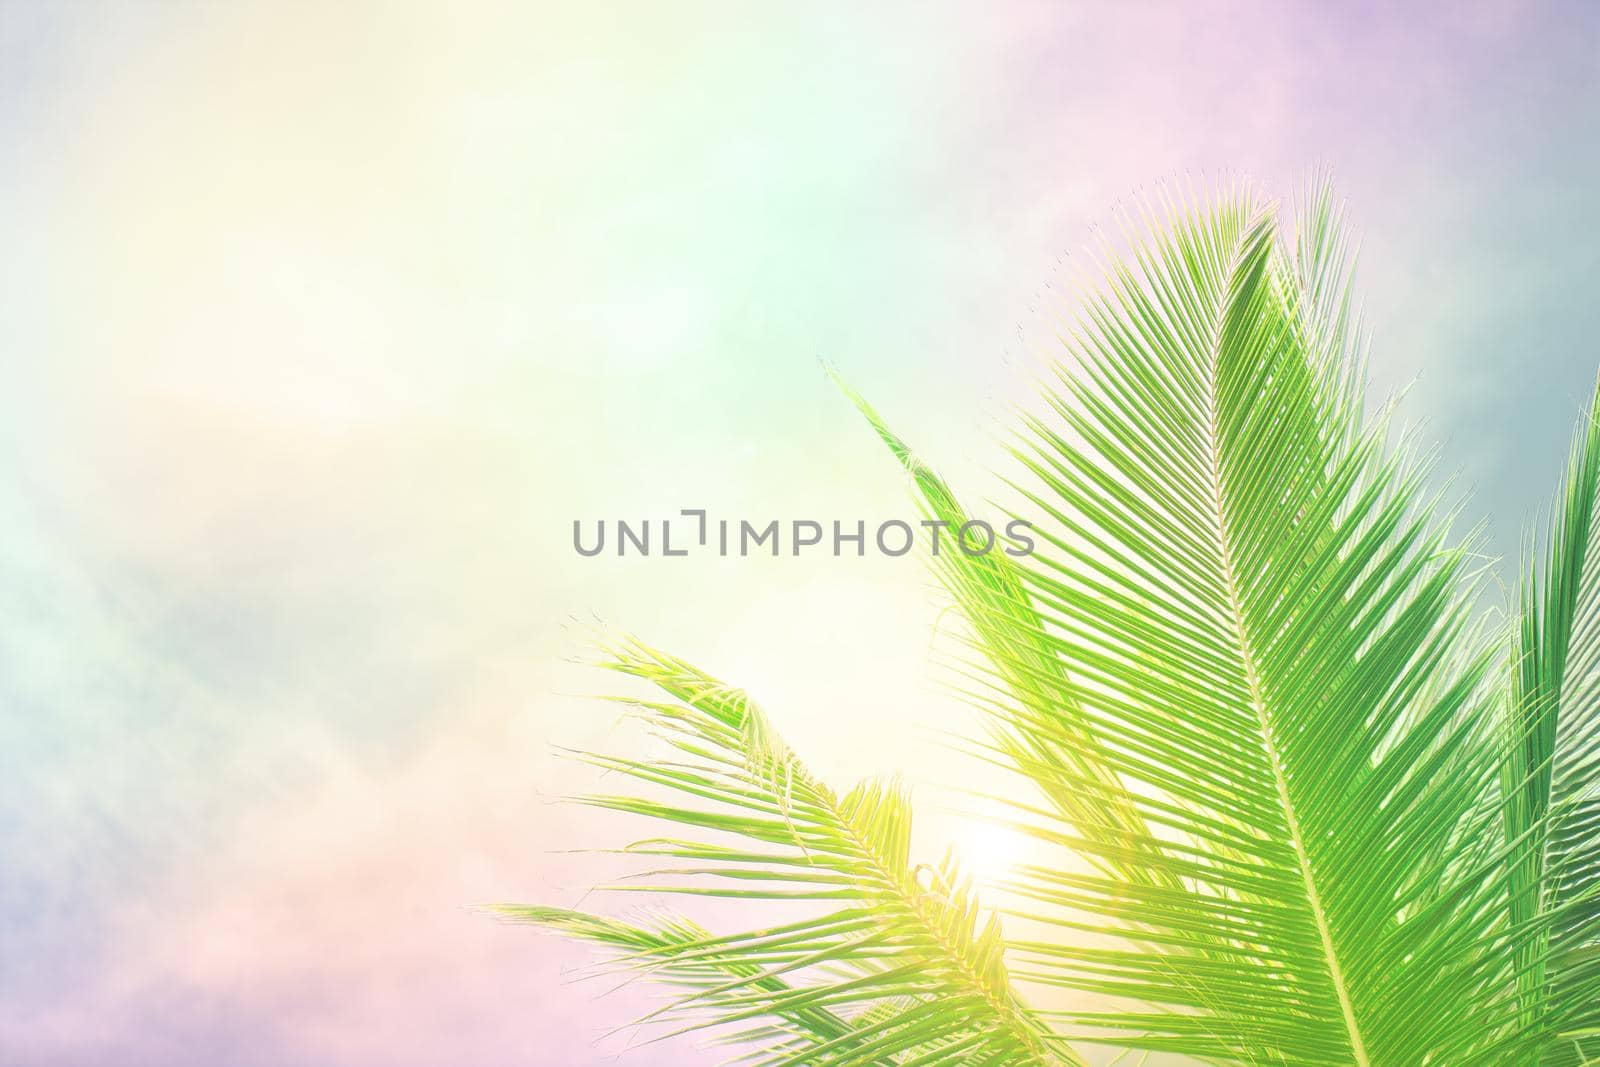 Selective focus on palm tree leaves over peaceful tropical beach background, blue sea landscape, natural abstract card